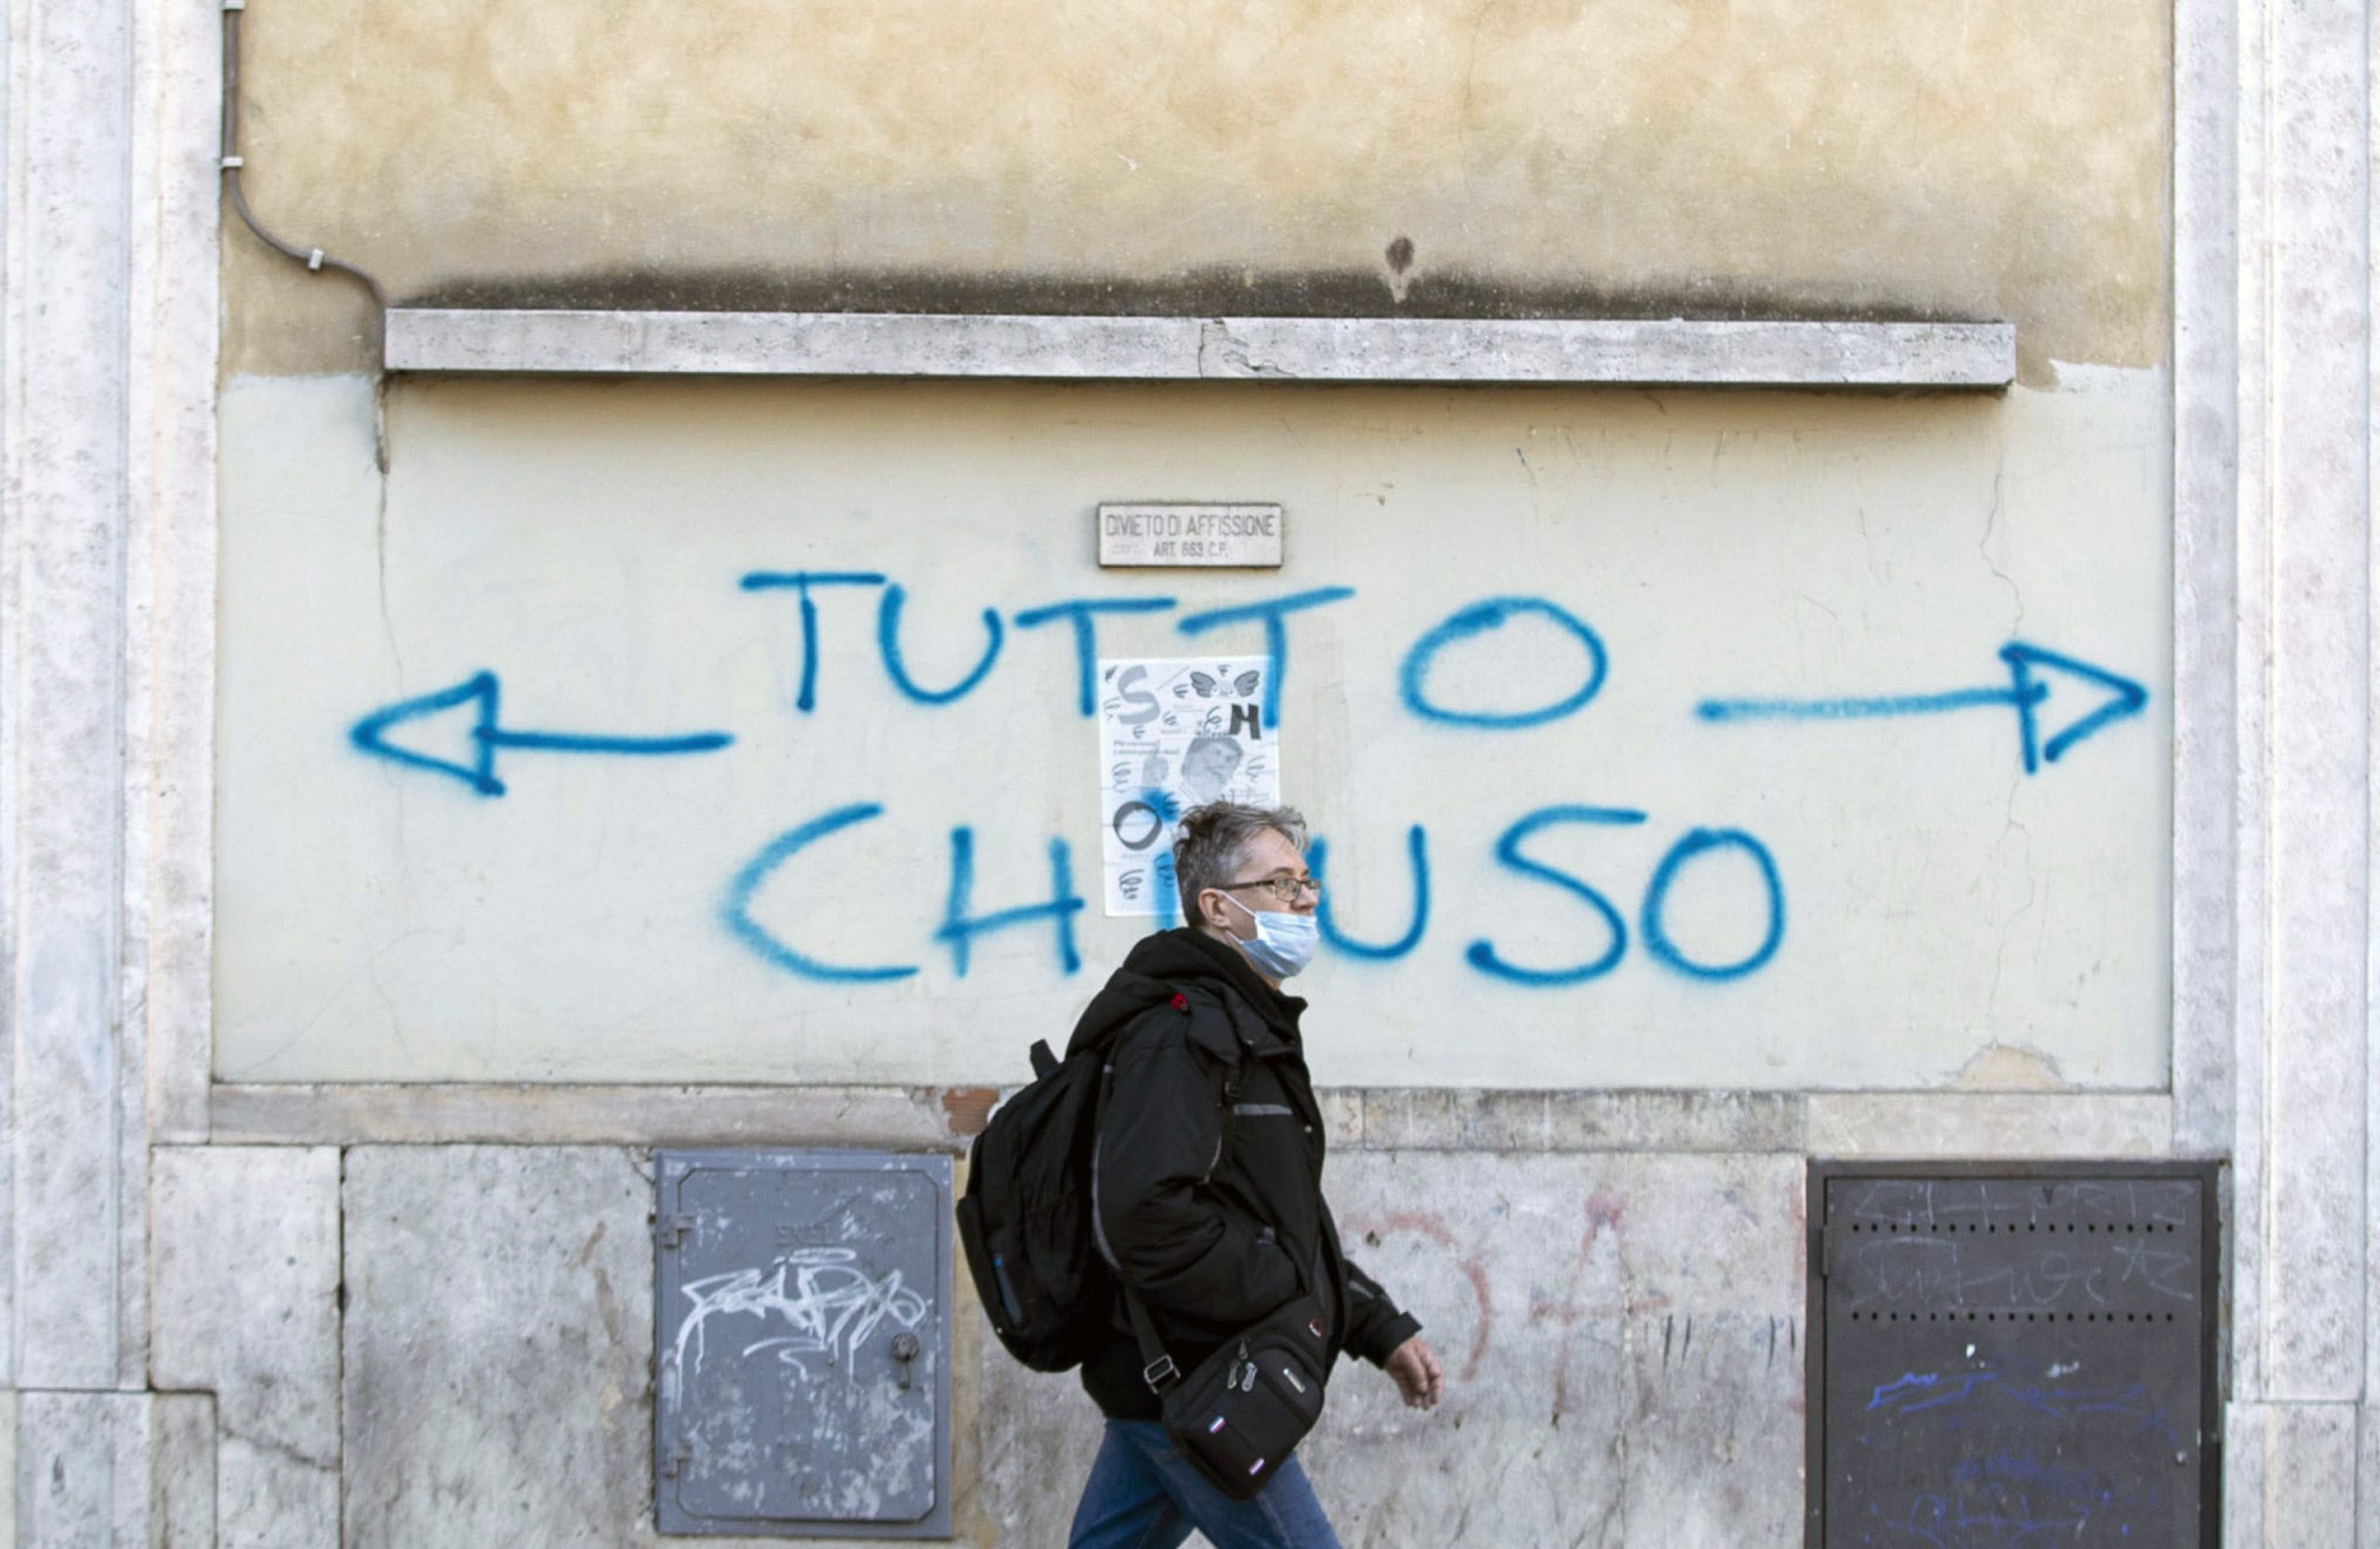 epaselect epa08278763 An inscription on a wall in the capital says 'all closed', in Rome, Italy, 08 March 2020. The Italian authorities have taken the drastic measure of shutting off the entire northern Italian region of Lombardy, home to about 16 million people, in a bid to halt the ongoing coronavirus epidemic in the Mediterranean country. The number of confirmed cases of the COVID-19 disease caused by the SARS-CoV-2 coronavirus in Italy has jumped up to at least 5,883, while the death toll has surpassed 230, making Italy the nation with the third-highest number of infections (behind China and South Korea) and the second-highest death toll after China.  EPA/Massimo Percossi